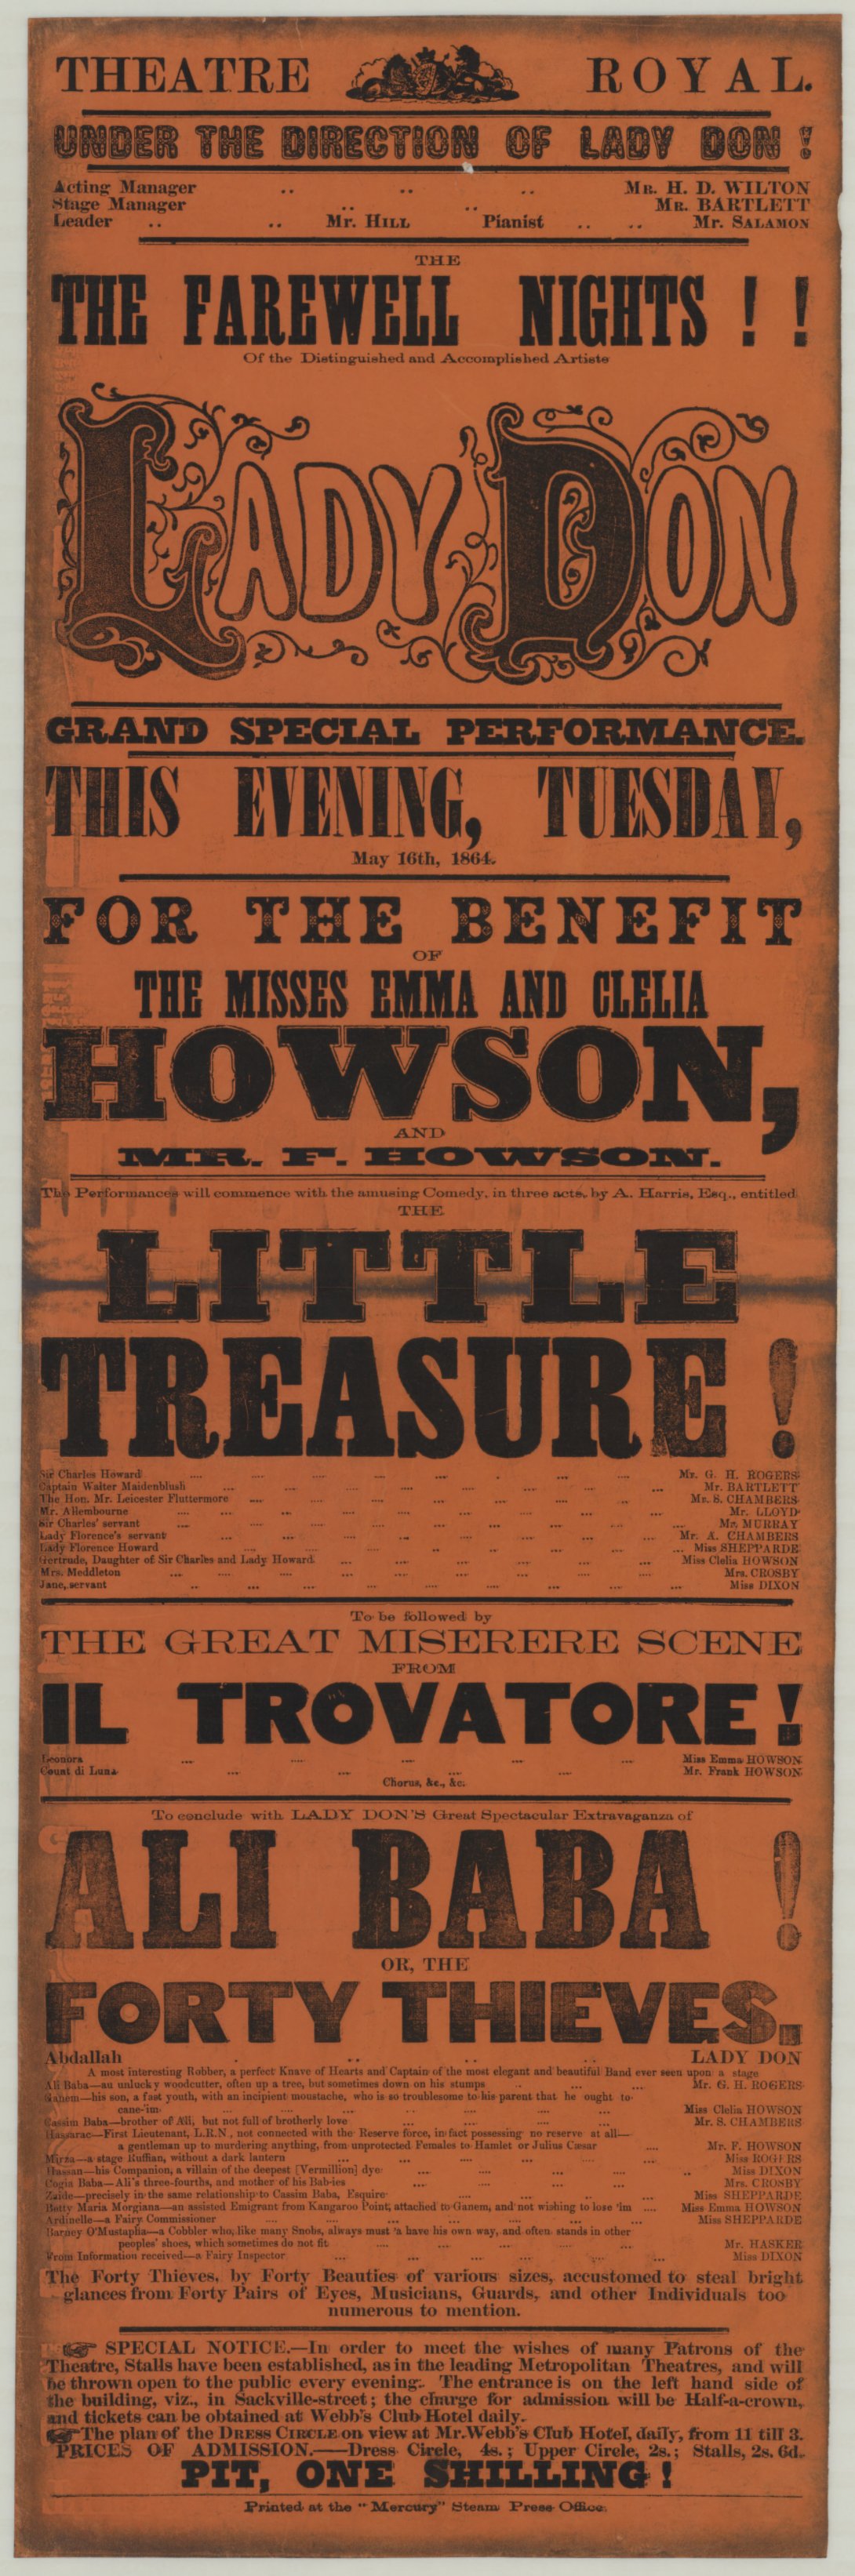 A red toned newspaper ad with details about a farewell show for Lady Don being performed called Little Treasure!